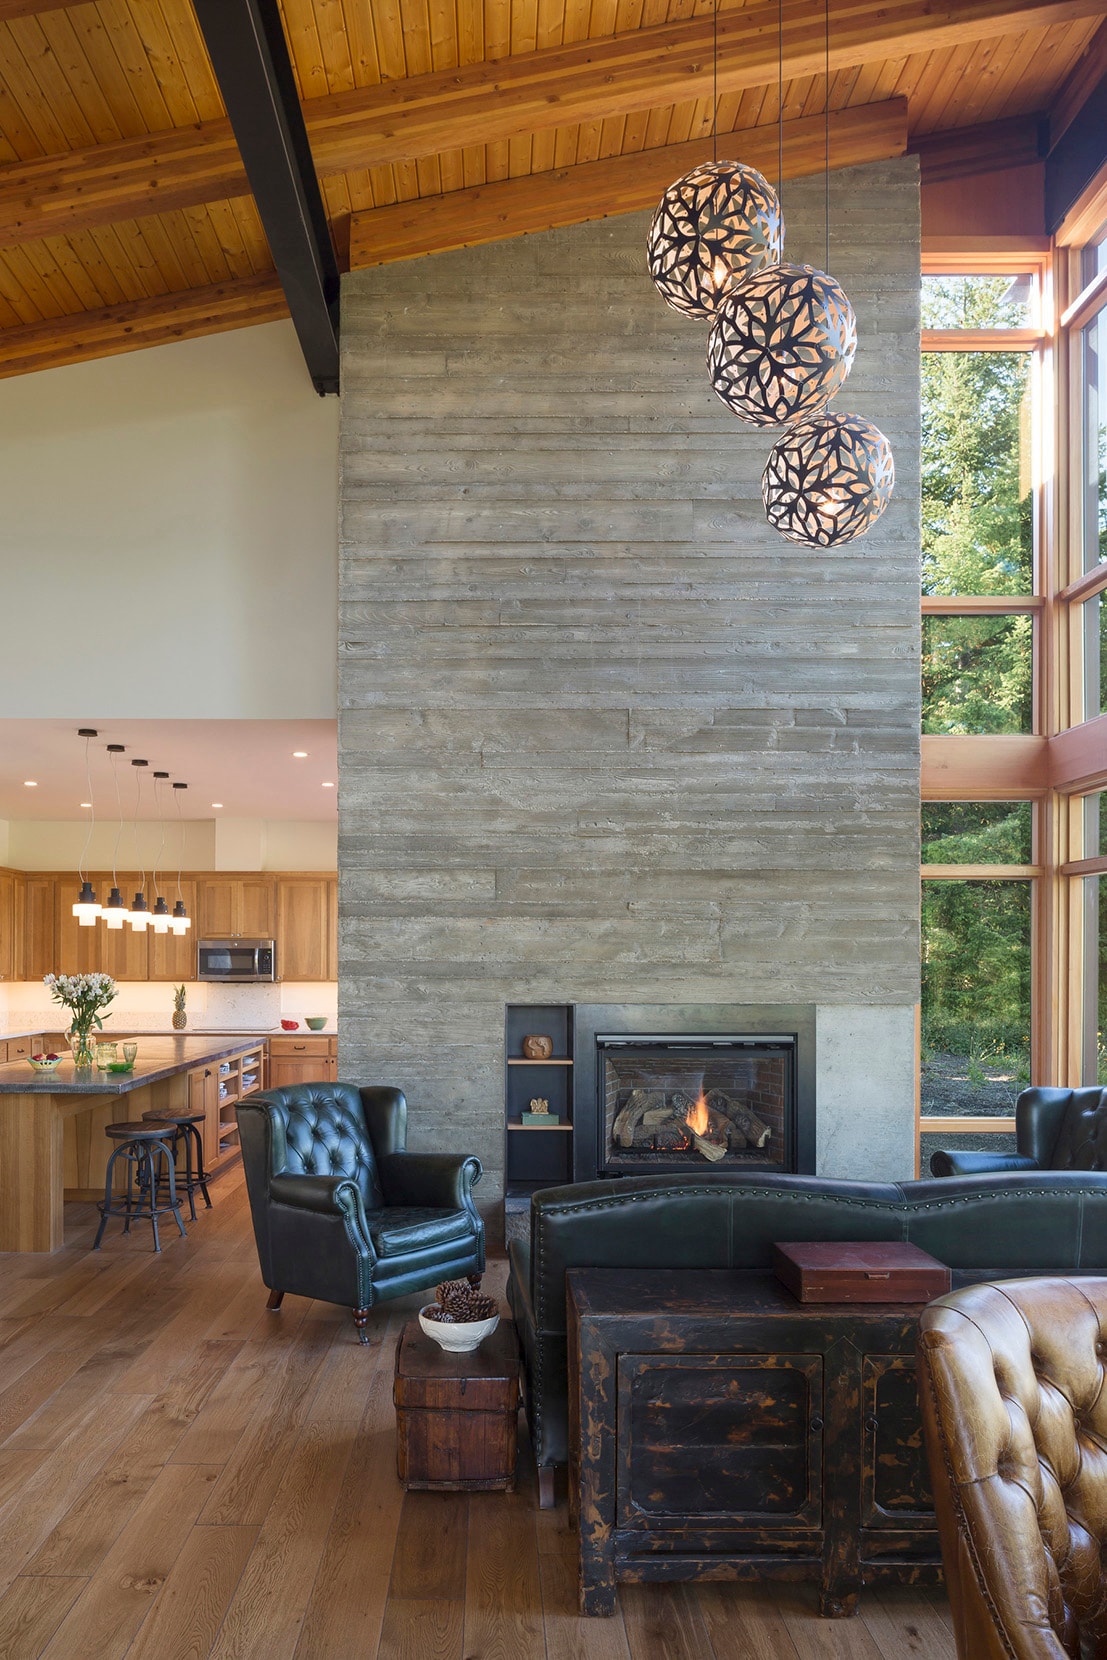 Tumble Creek Cabin Coates Design Architects Cle Elum United States Homes Houses Modern Wooden Open Glass